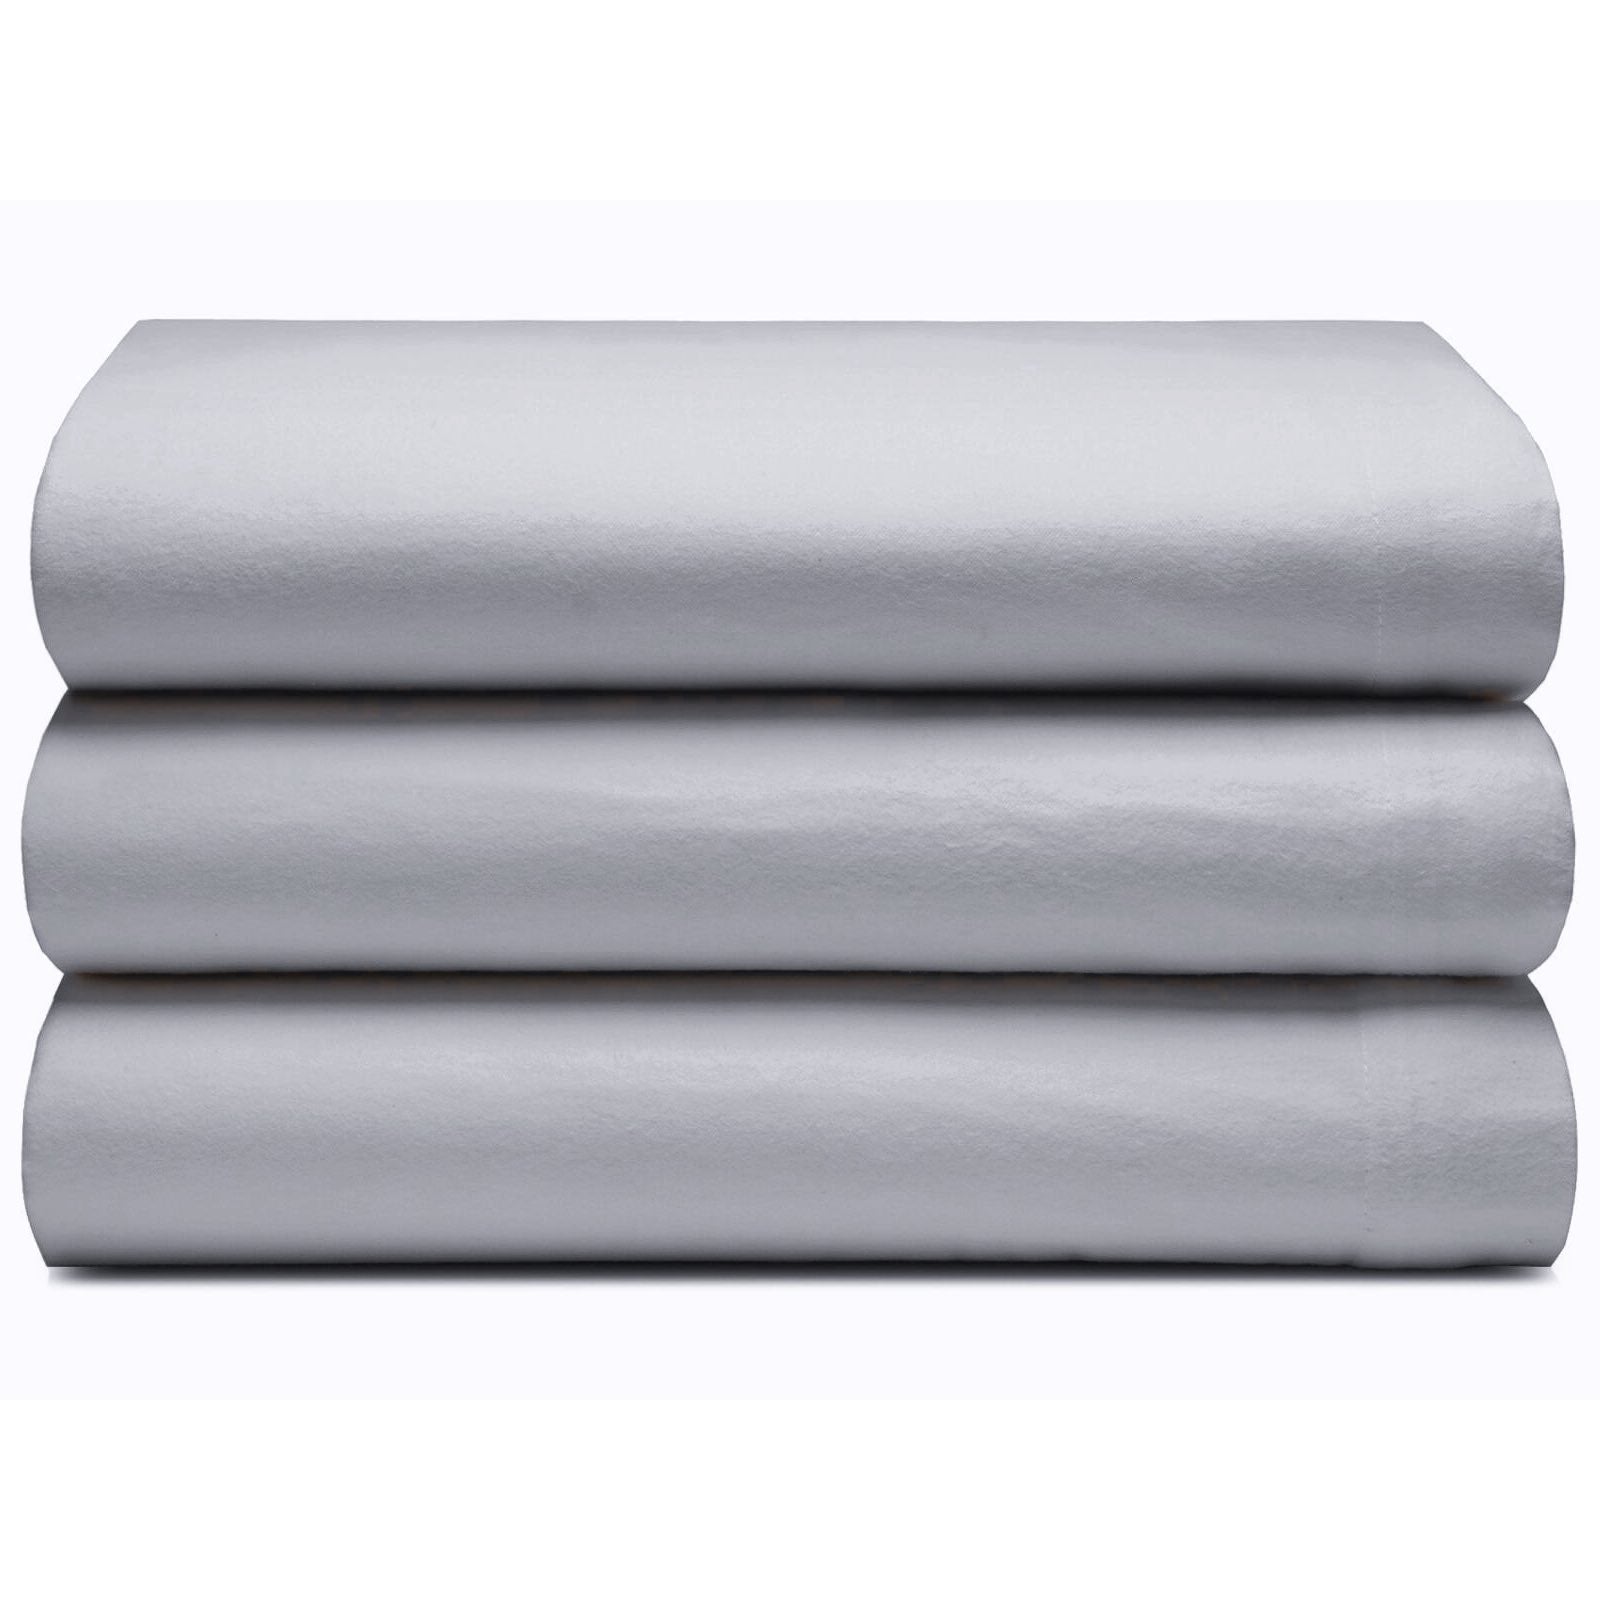 Riggs Premier Flannelette Brushed Cotton Sheets - Grey